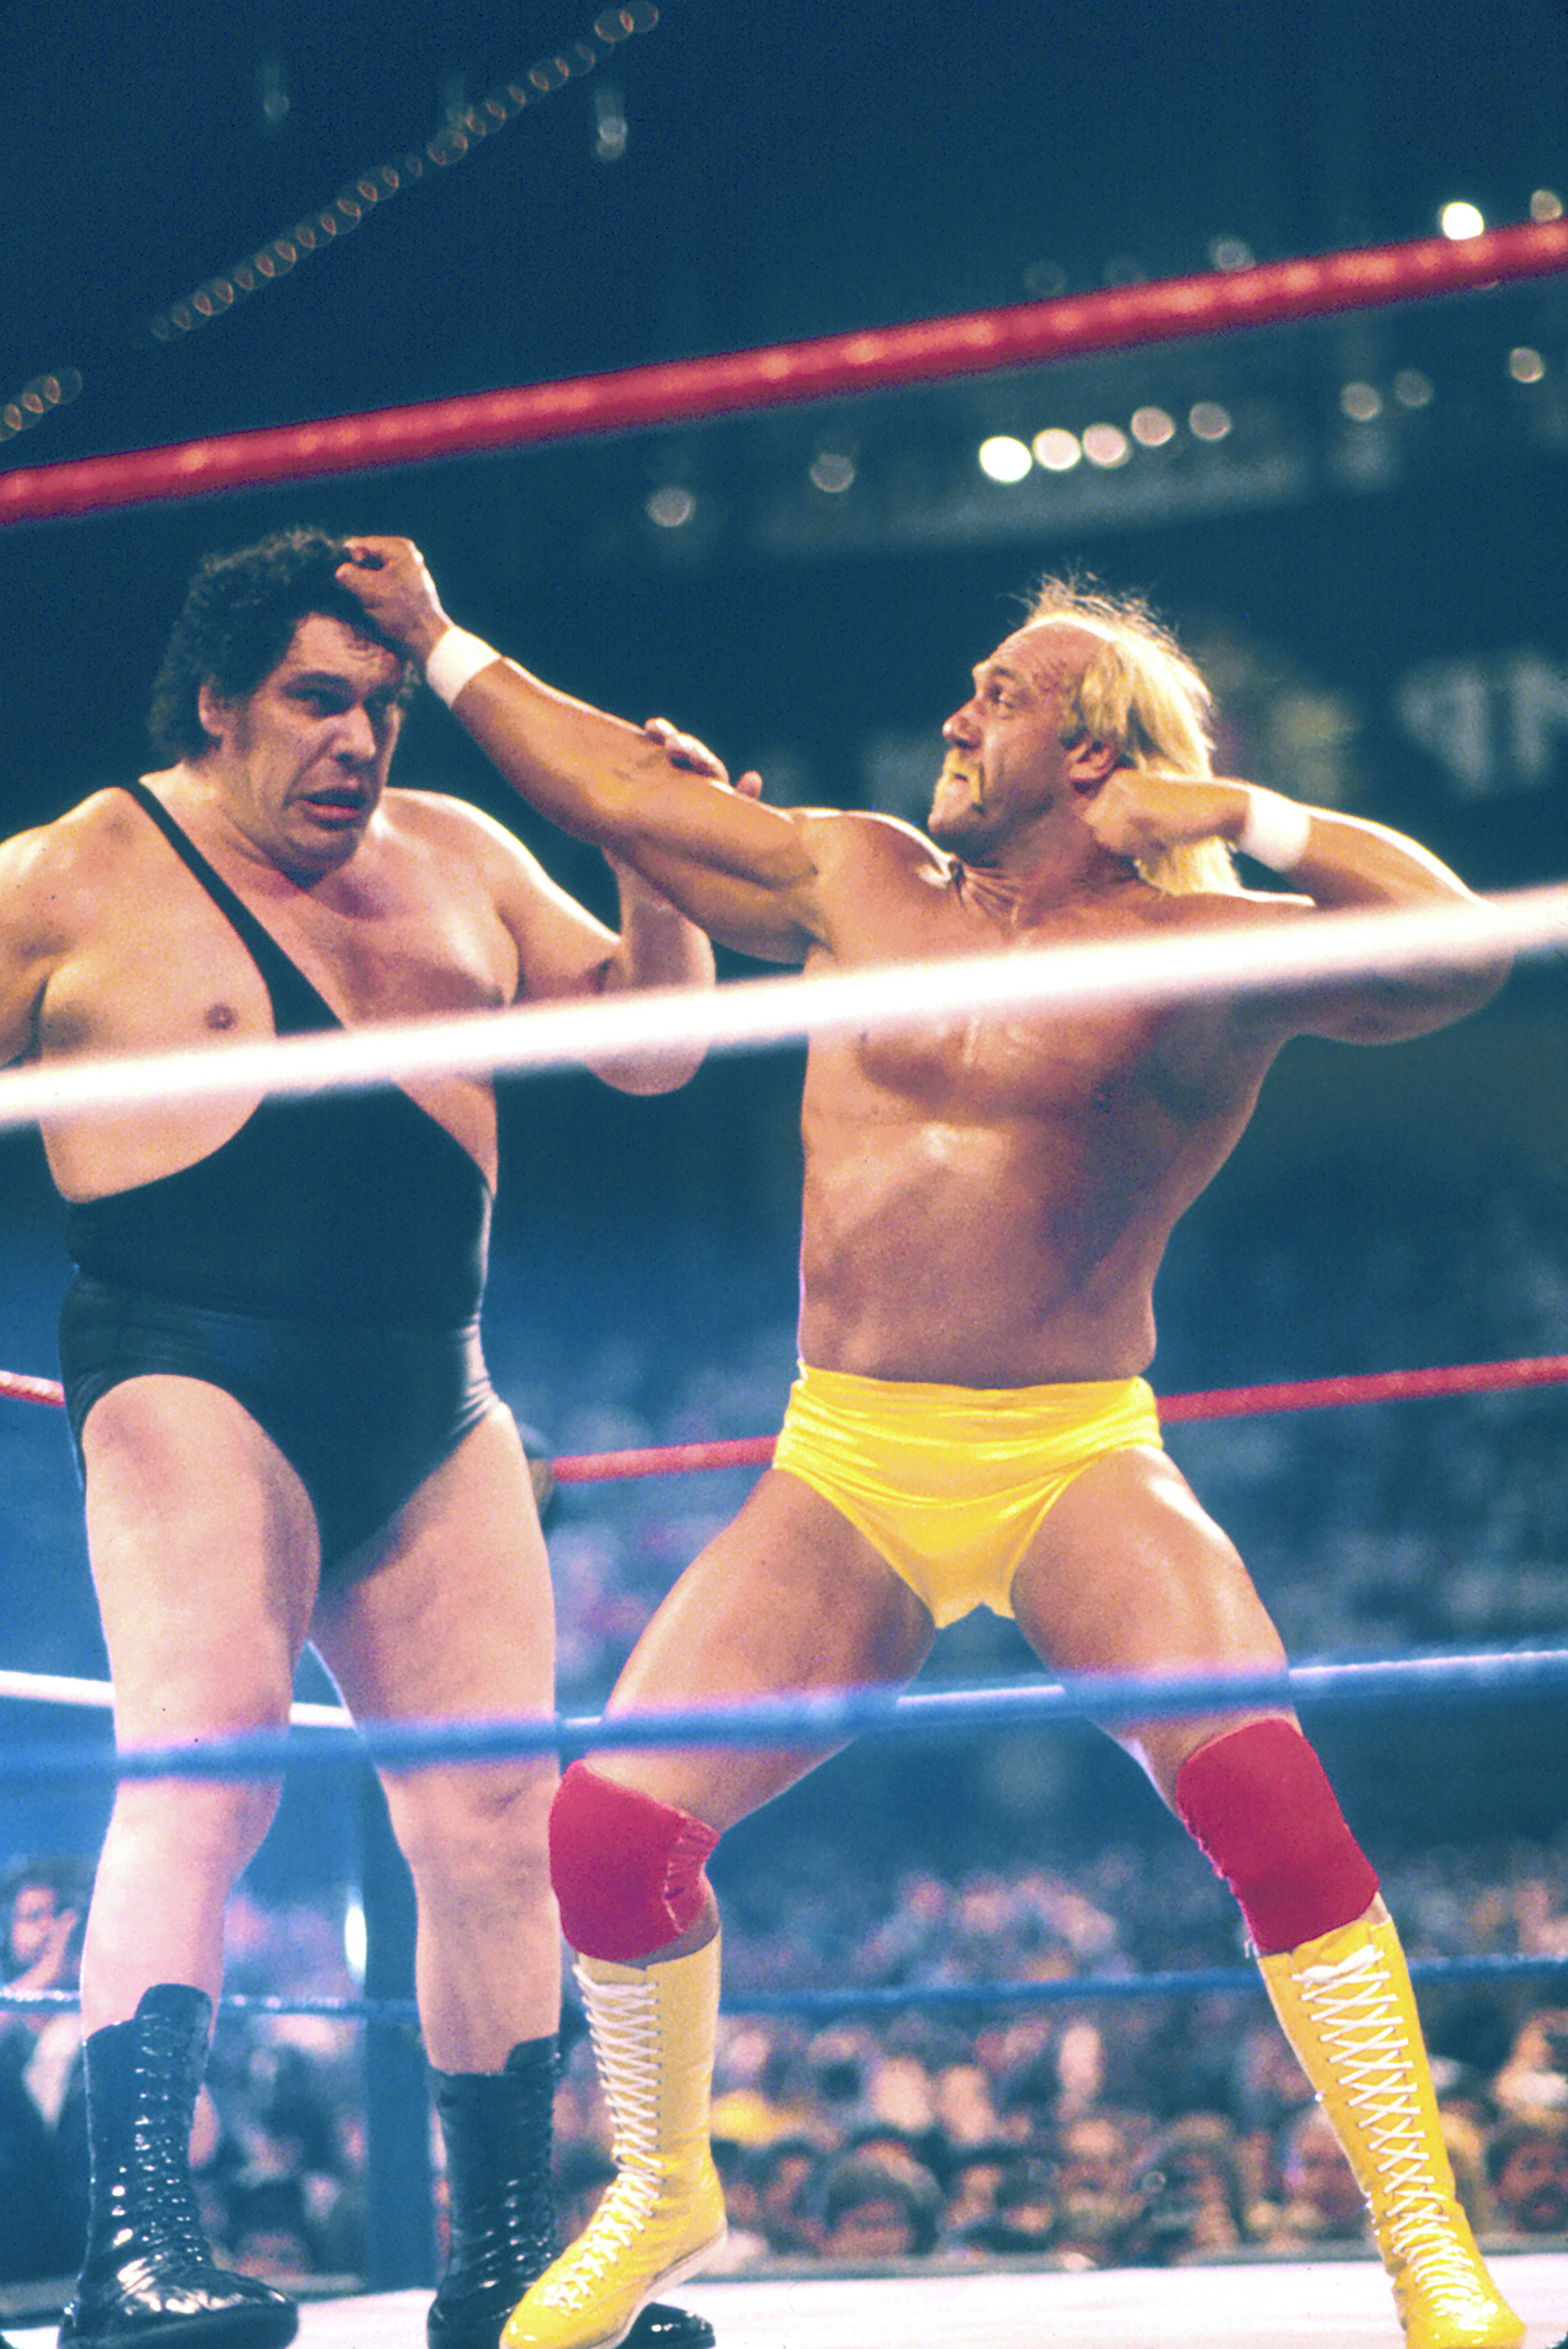 HULK HOGAN AND ANDRE THE GIANT